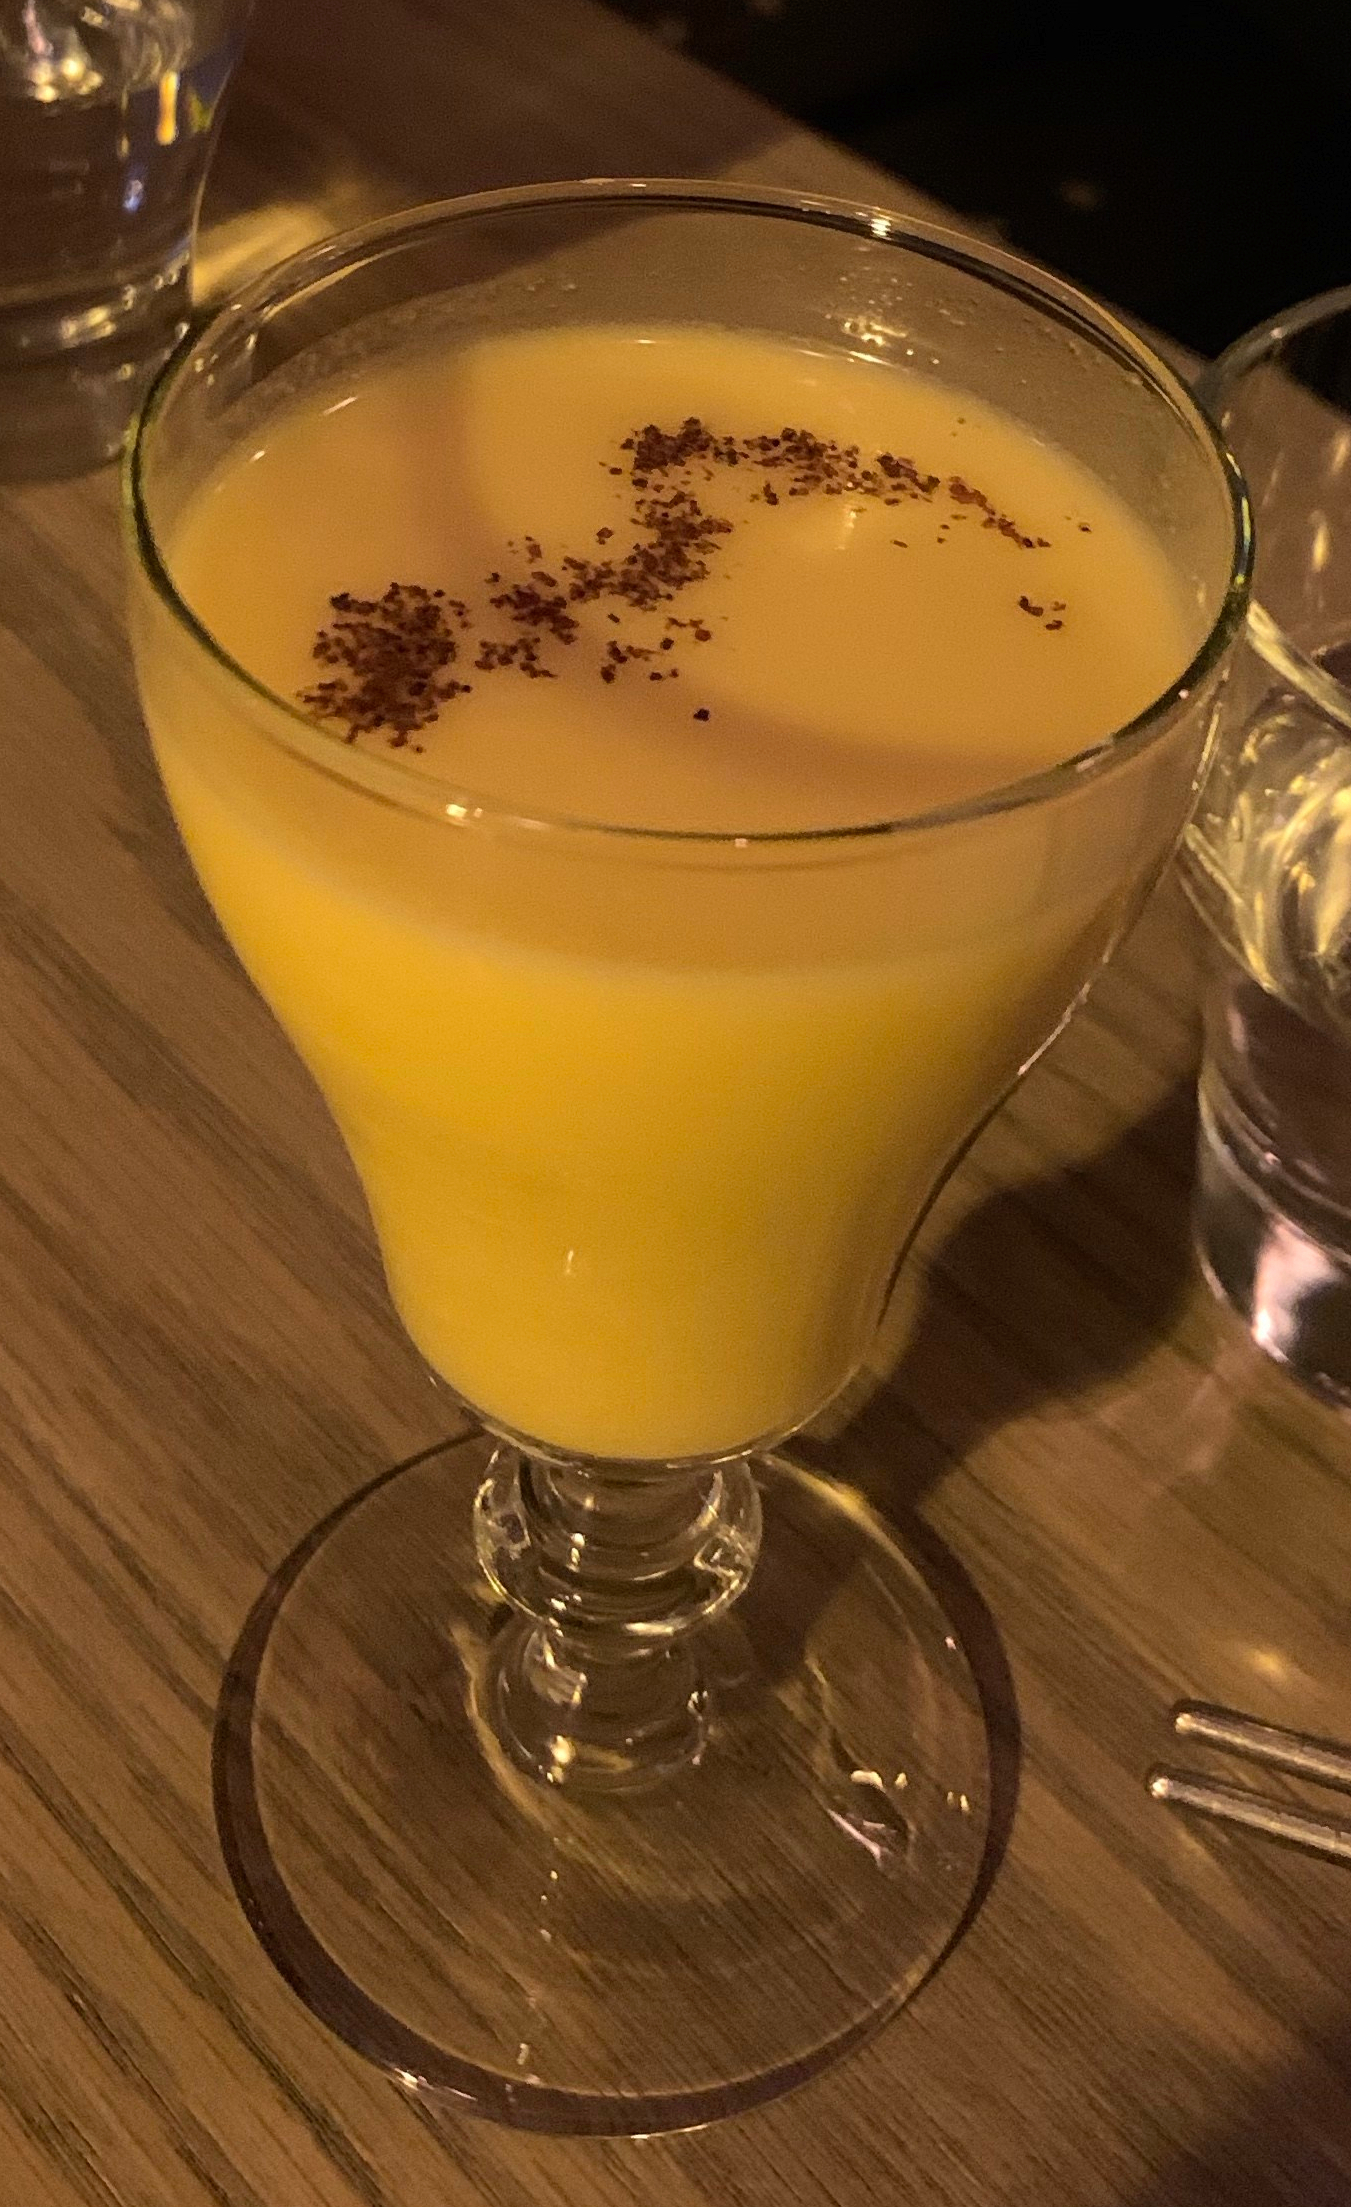 An orange-ish fluid in a cocktail glass, with some spices on top